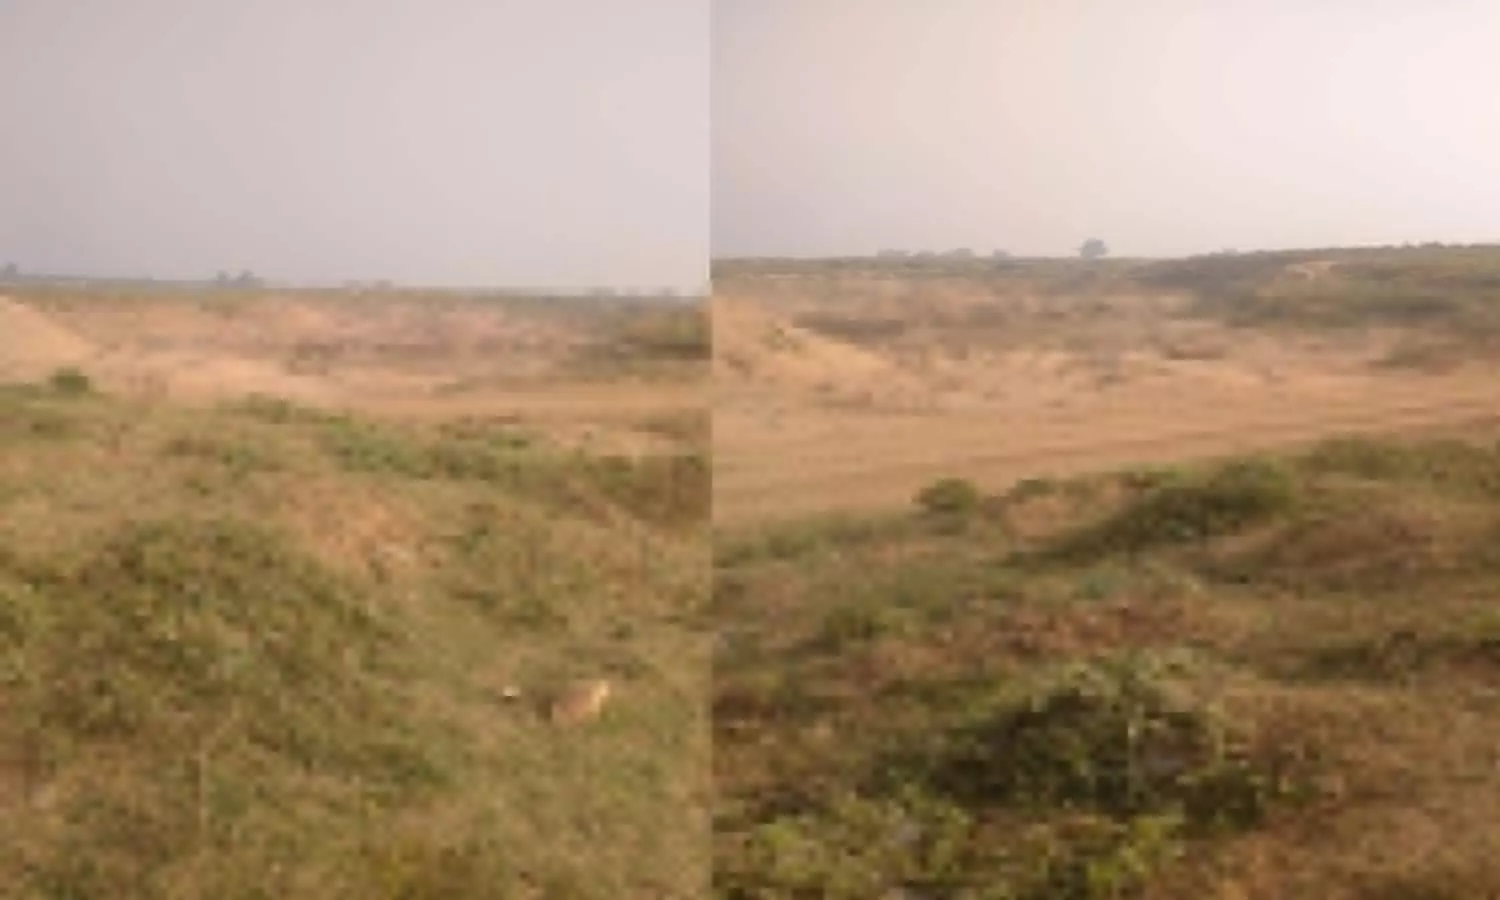 In the tender regarding Sonbhadra mining, the mining department showed sand at the clay place